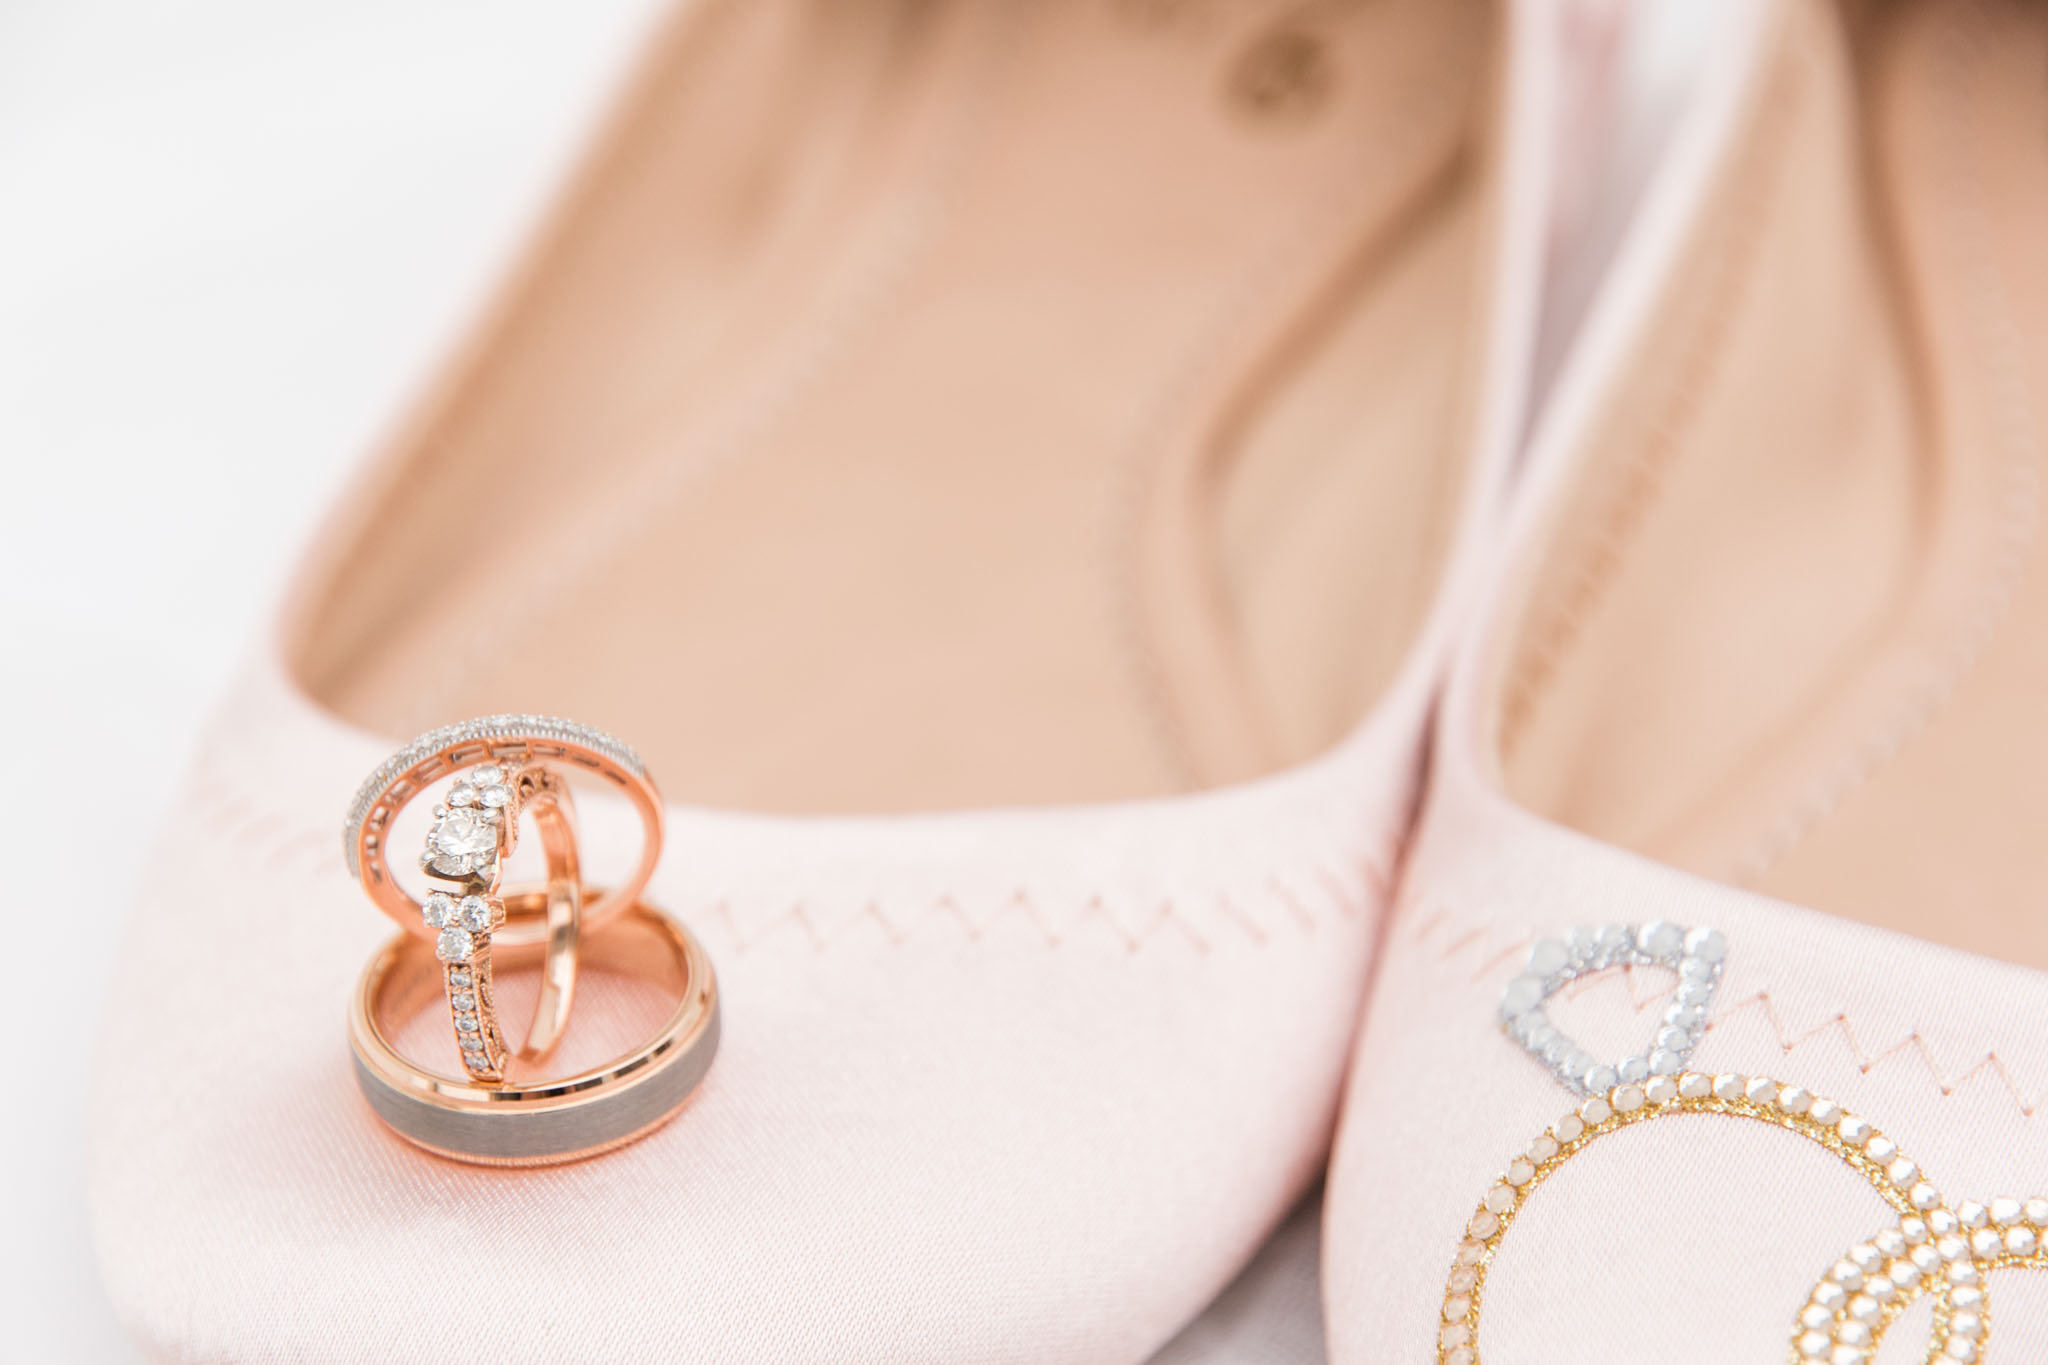 Rose gold engagement ring and wedding bands sit on brides shoes.